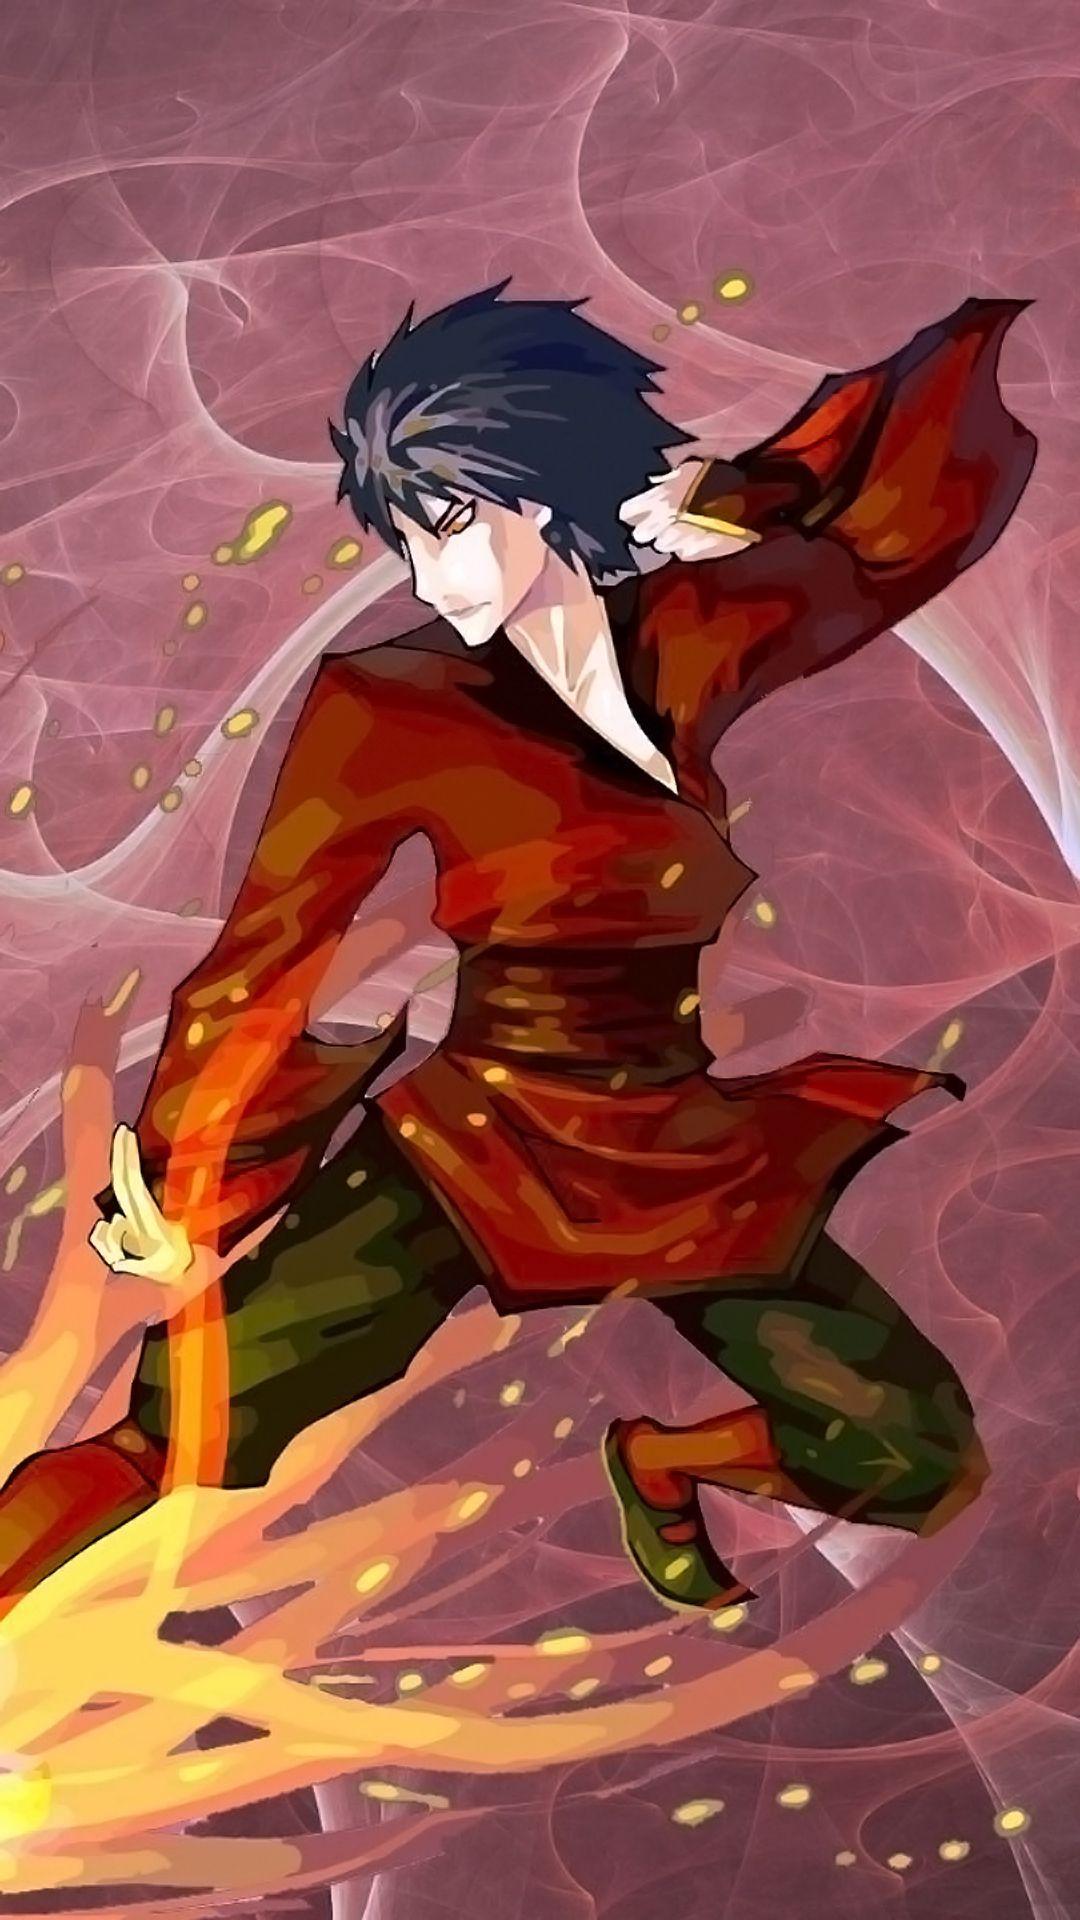 Wallpaper.wiki Zuko Avatar The Last Airbender Background For Android